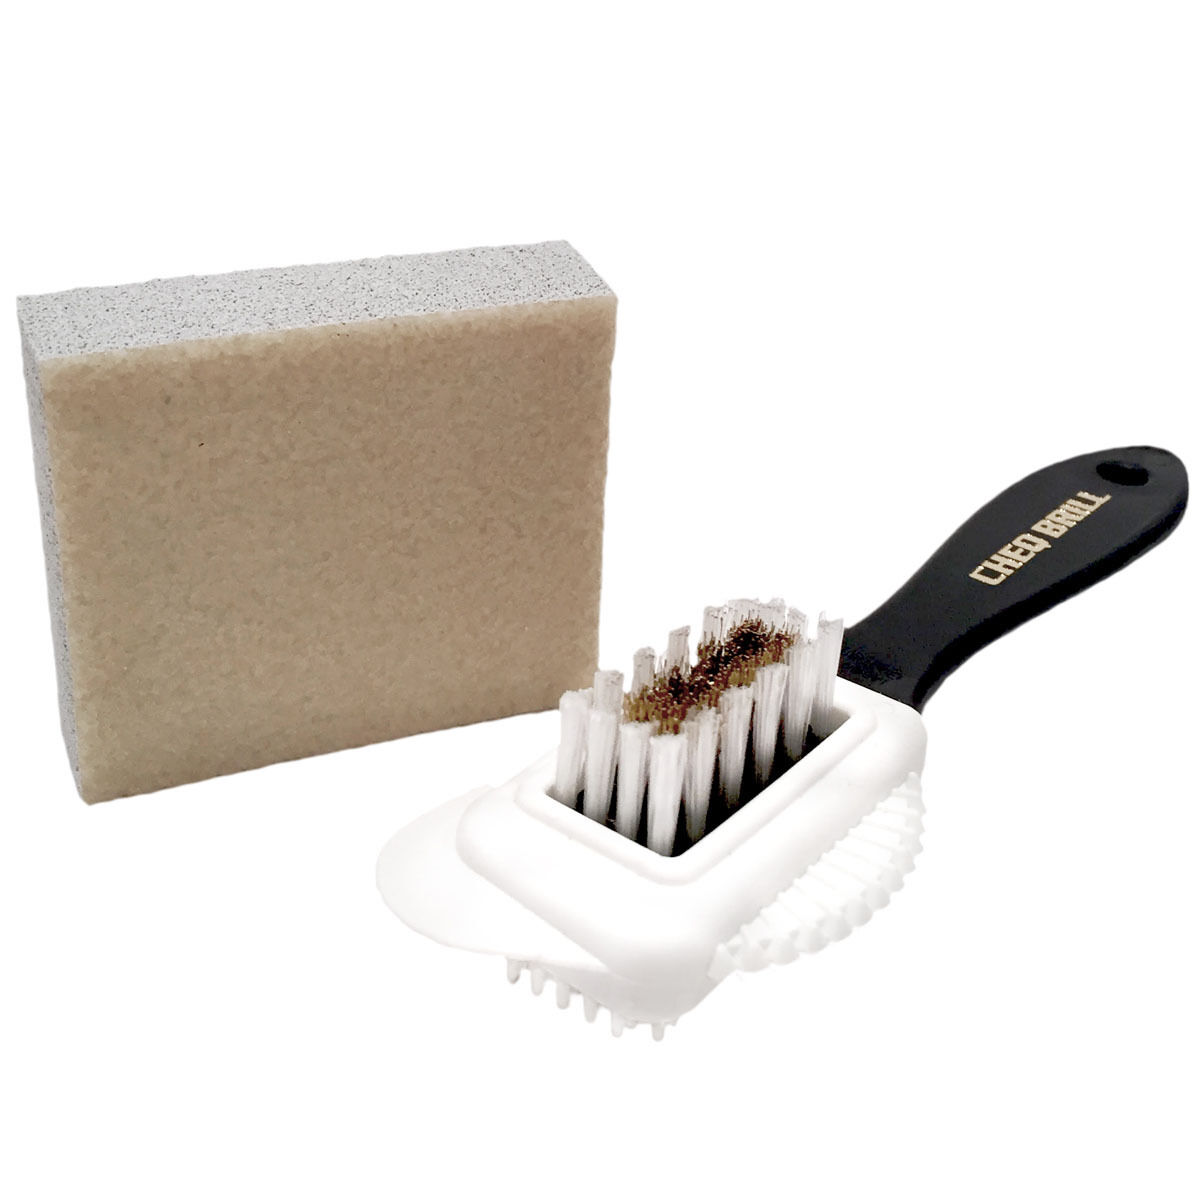 Suede and Nubuck Shoe Cleaner Kit 4 Way Brush and Eraser Shoe Cleaning Kit NEW